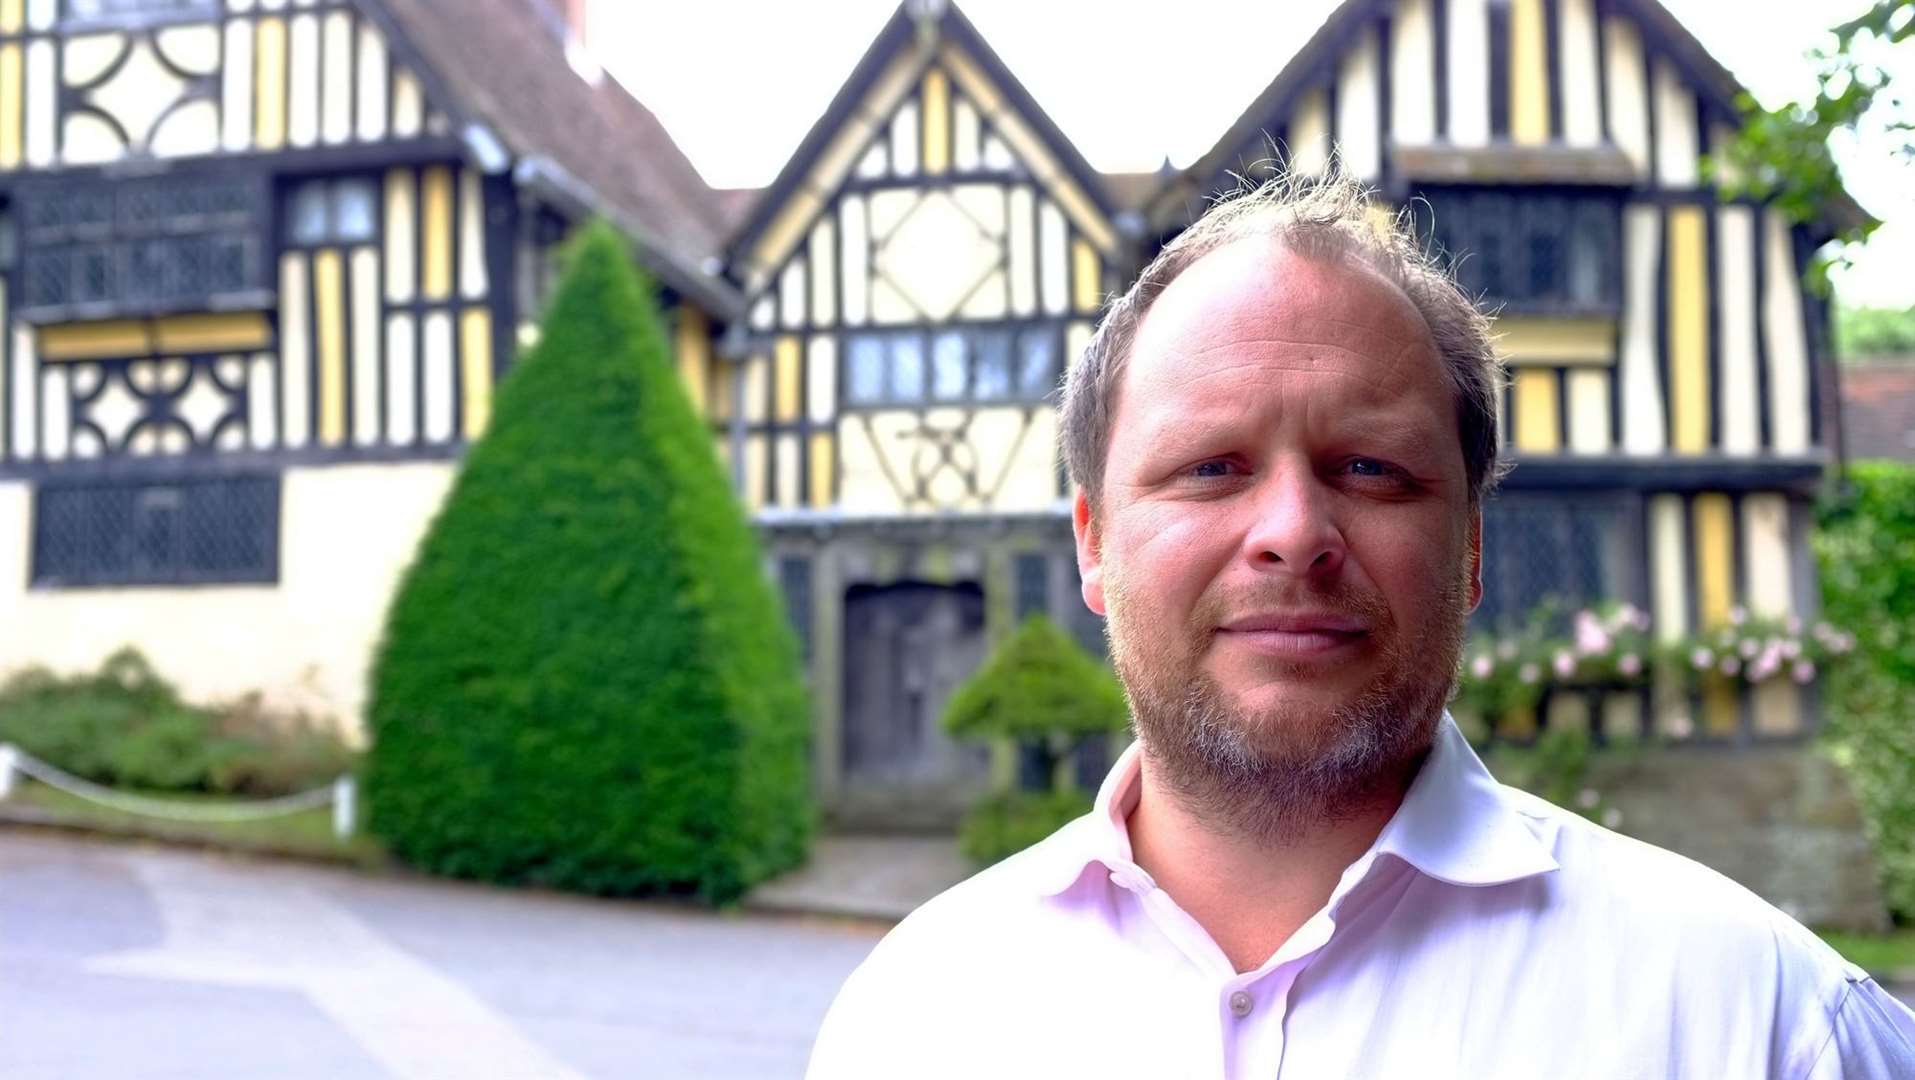 Alex Durtnell at Poundsbridge Manor - a house the firm worked on over 400 years ago Picture: Raw TV